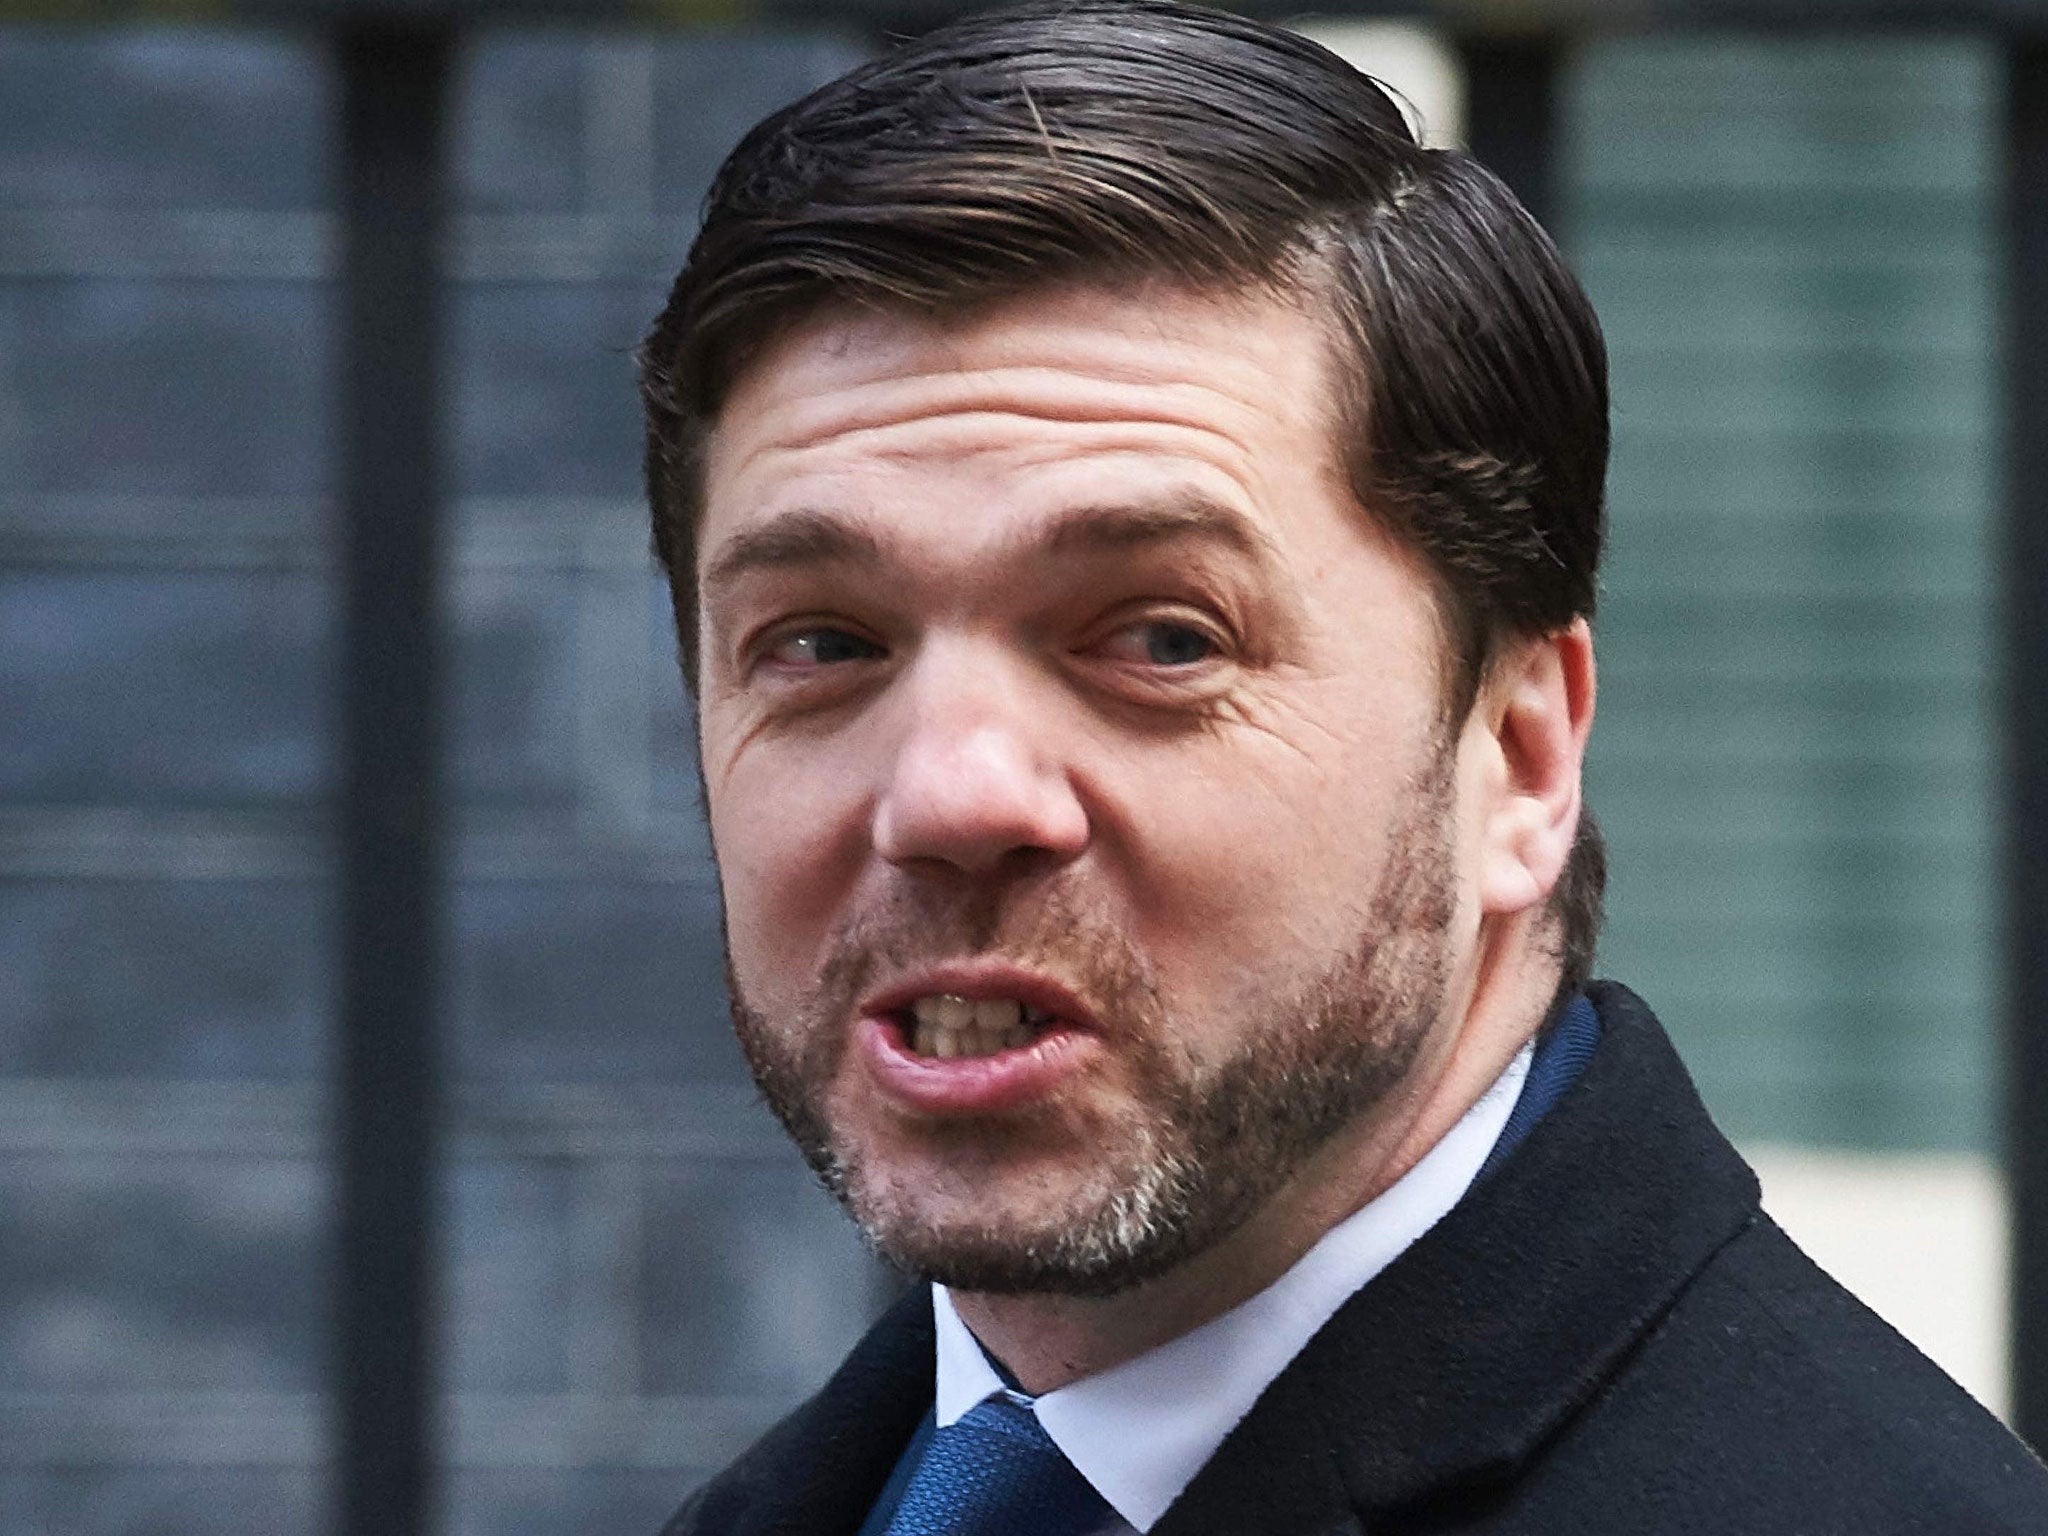 Stephen Crabb also voted against the Equality Act of Sexual Regulation Orientation 2007, which outlaws discrimination on the grounds of sexual orientation